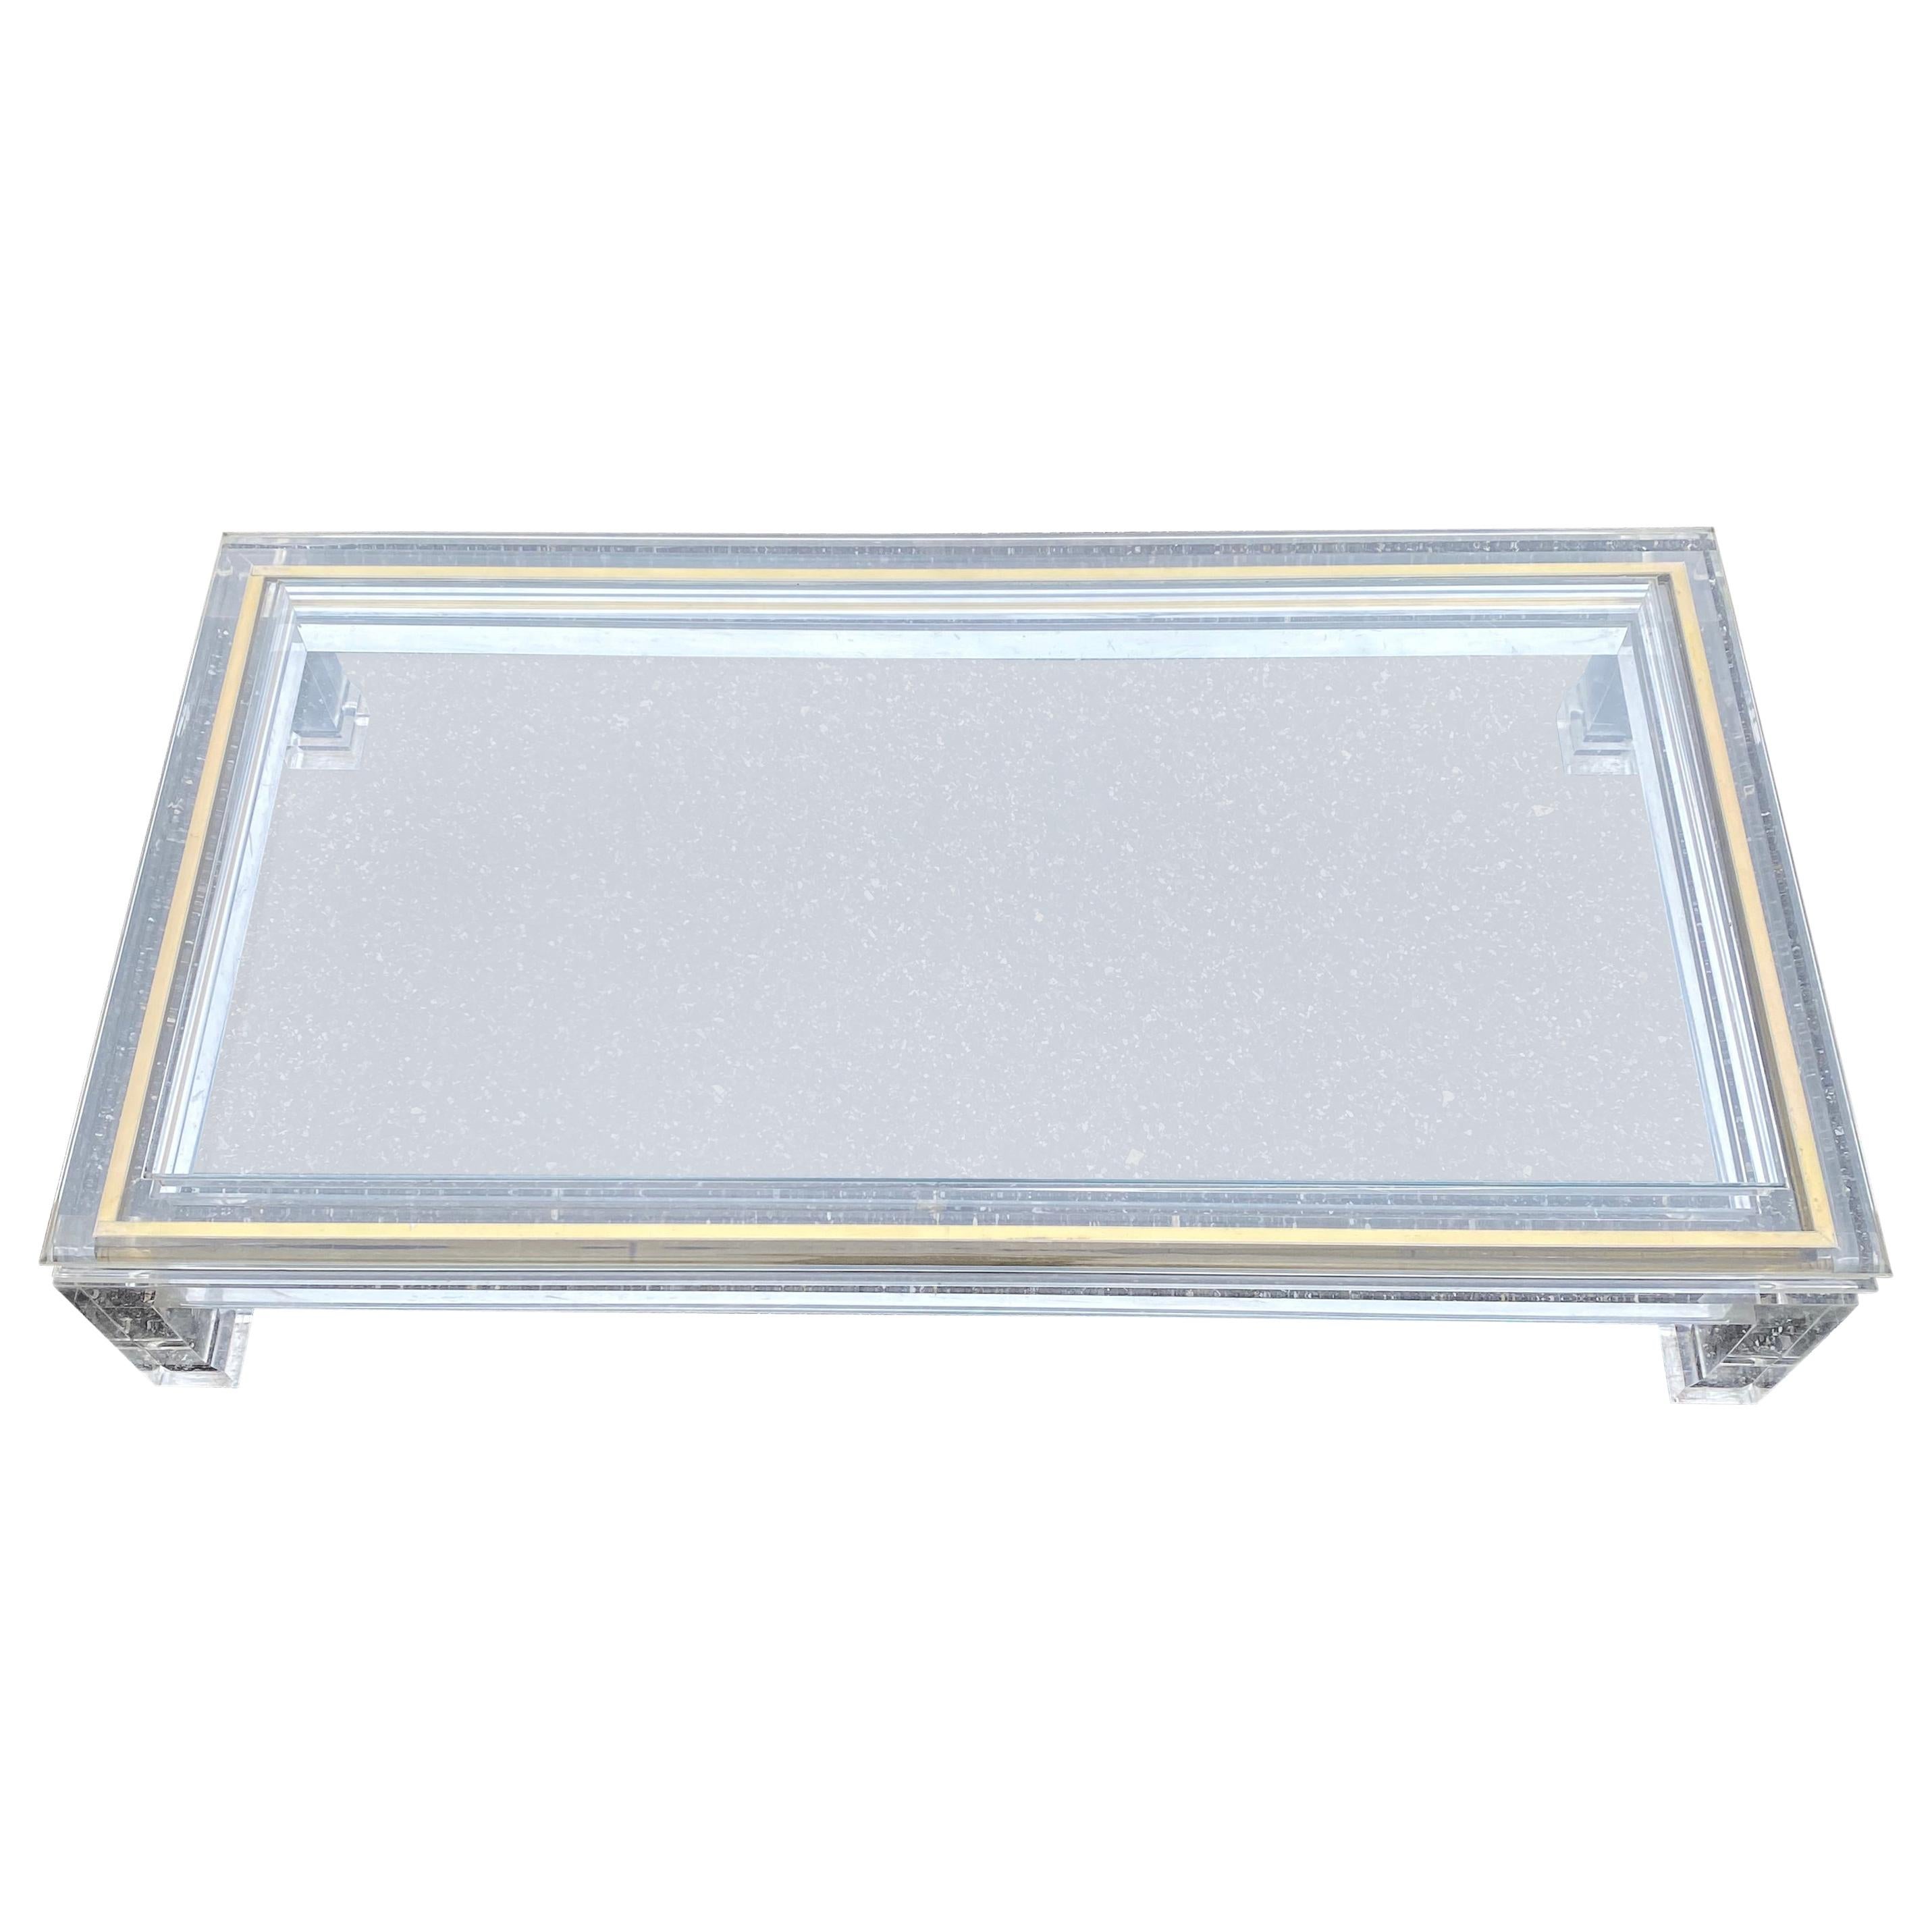 Large Italian Rectangular Lucite, Inlaid Brass Edge And Glass Cocktail Table For Sale